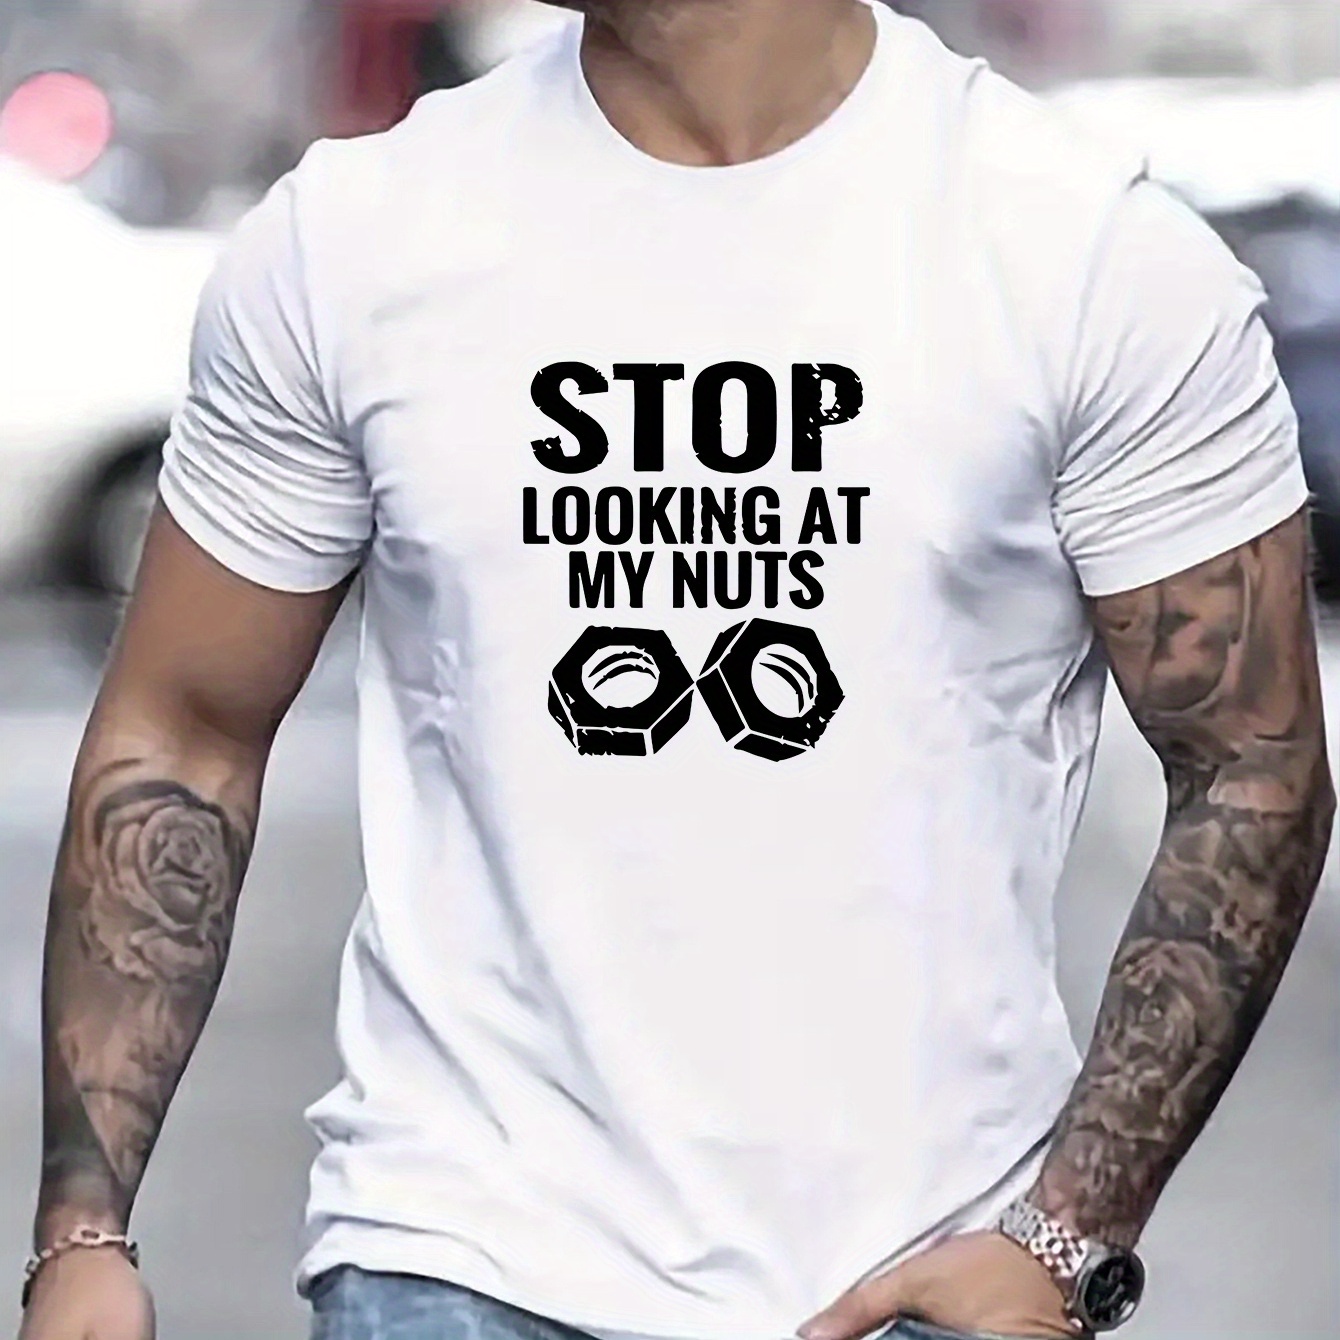 

1 Pc, Humorous Stop Looking At Mens T-shirt - Soft & Breathable Cotton - Perfect For Casual Wear